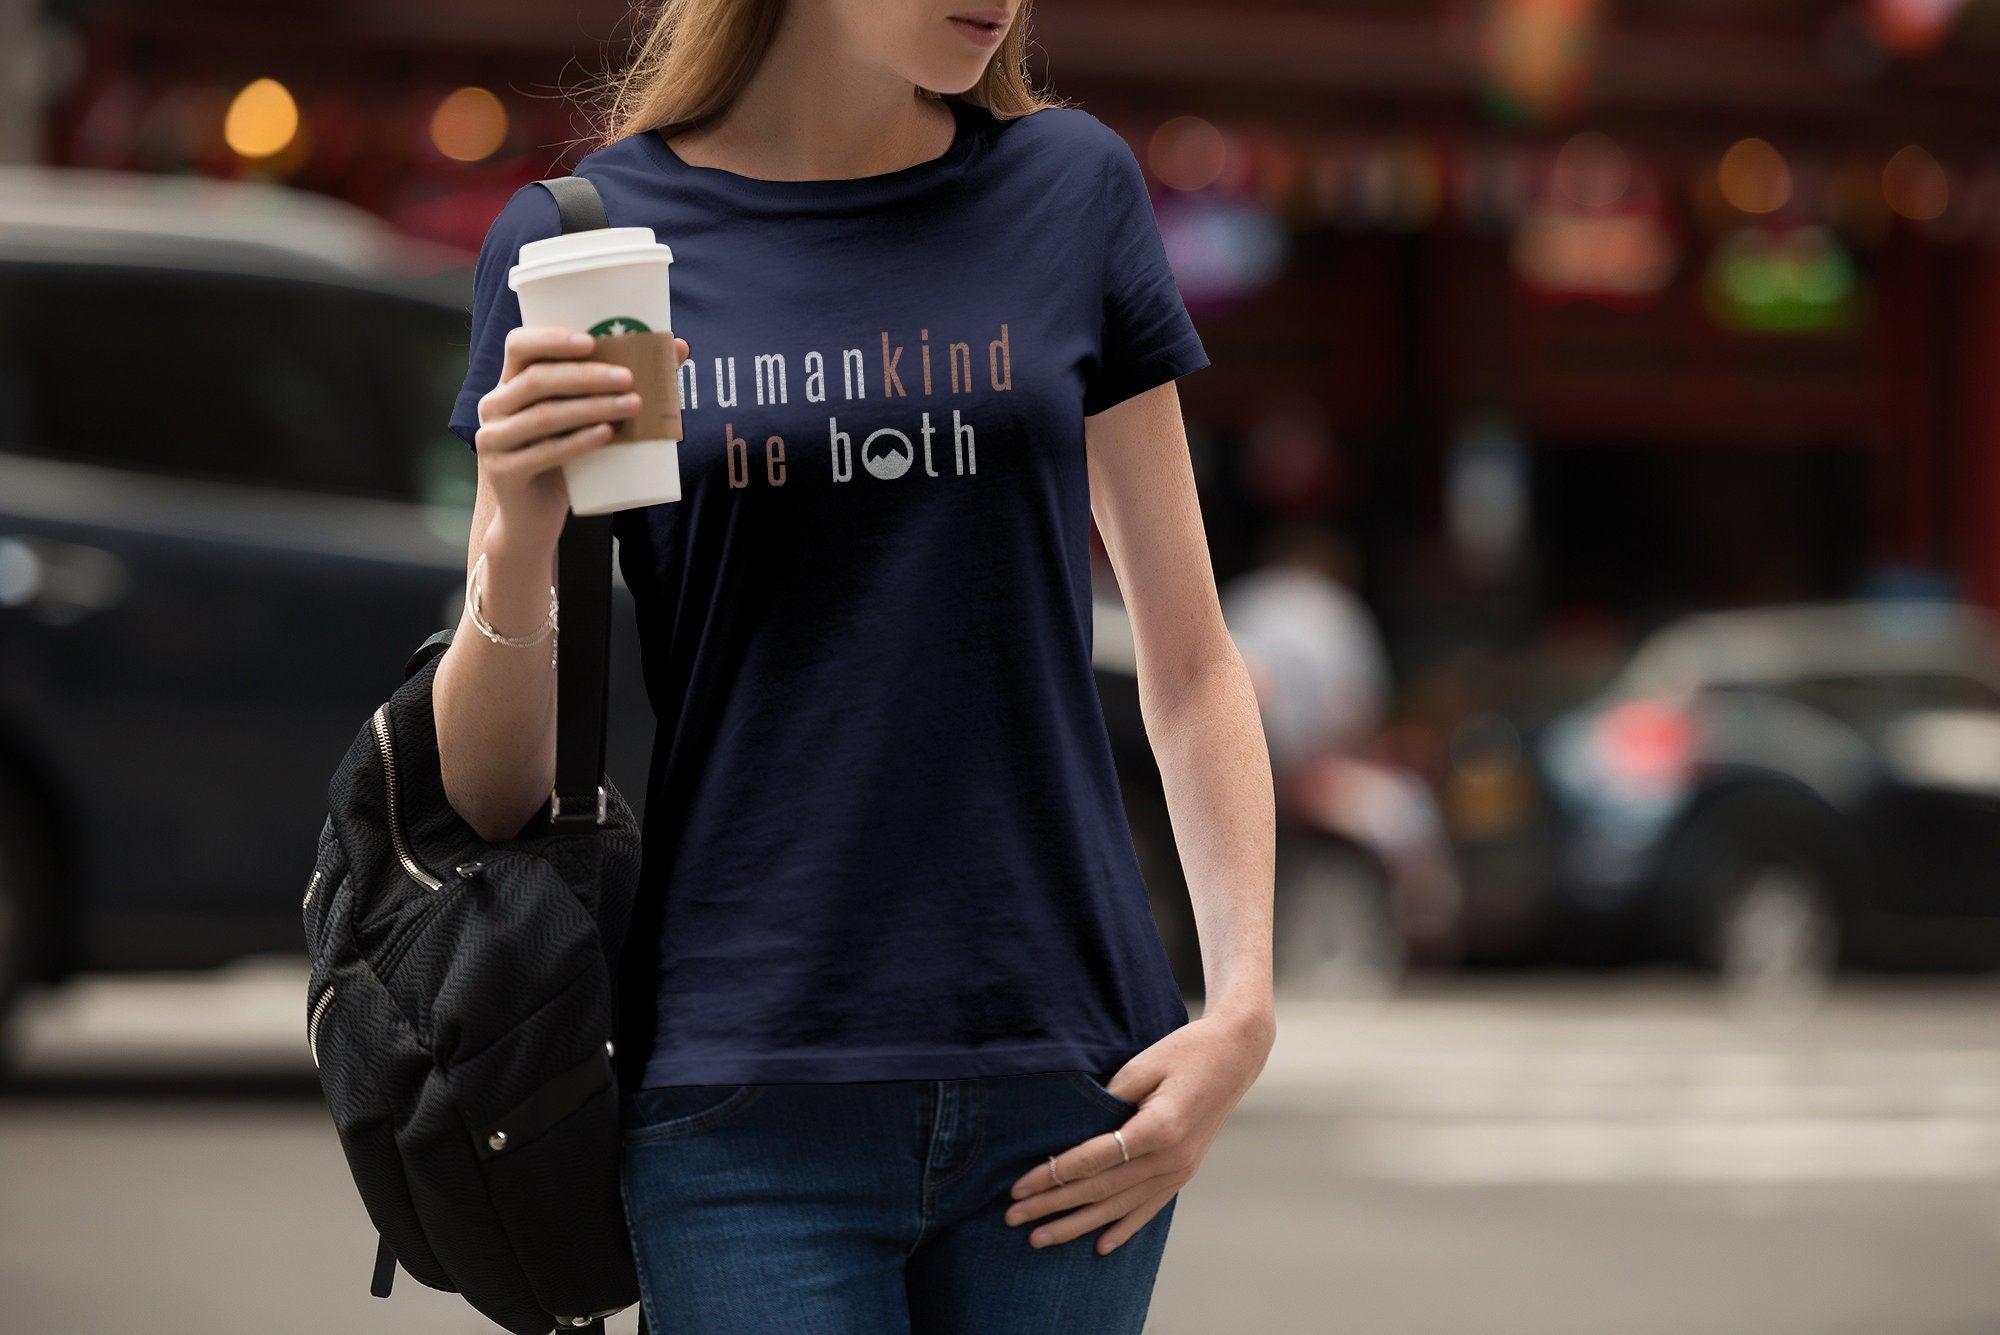 Humankind Be Both T-Shirt | Human kind Be Both T-Shirt | Humankind Be Both T | Humankind Be Both Shirt